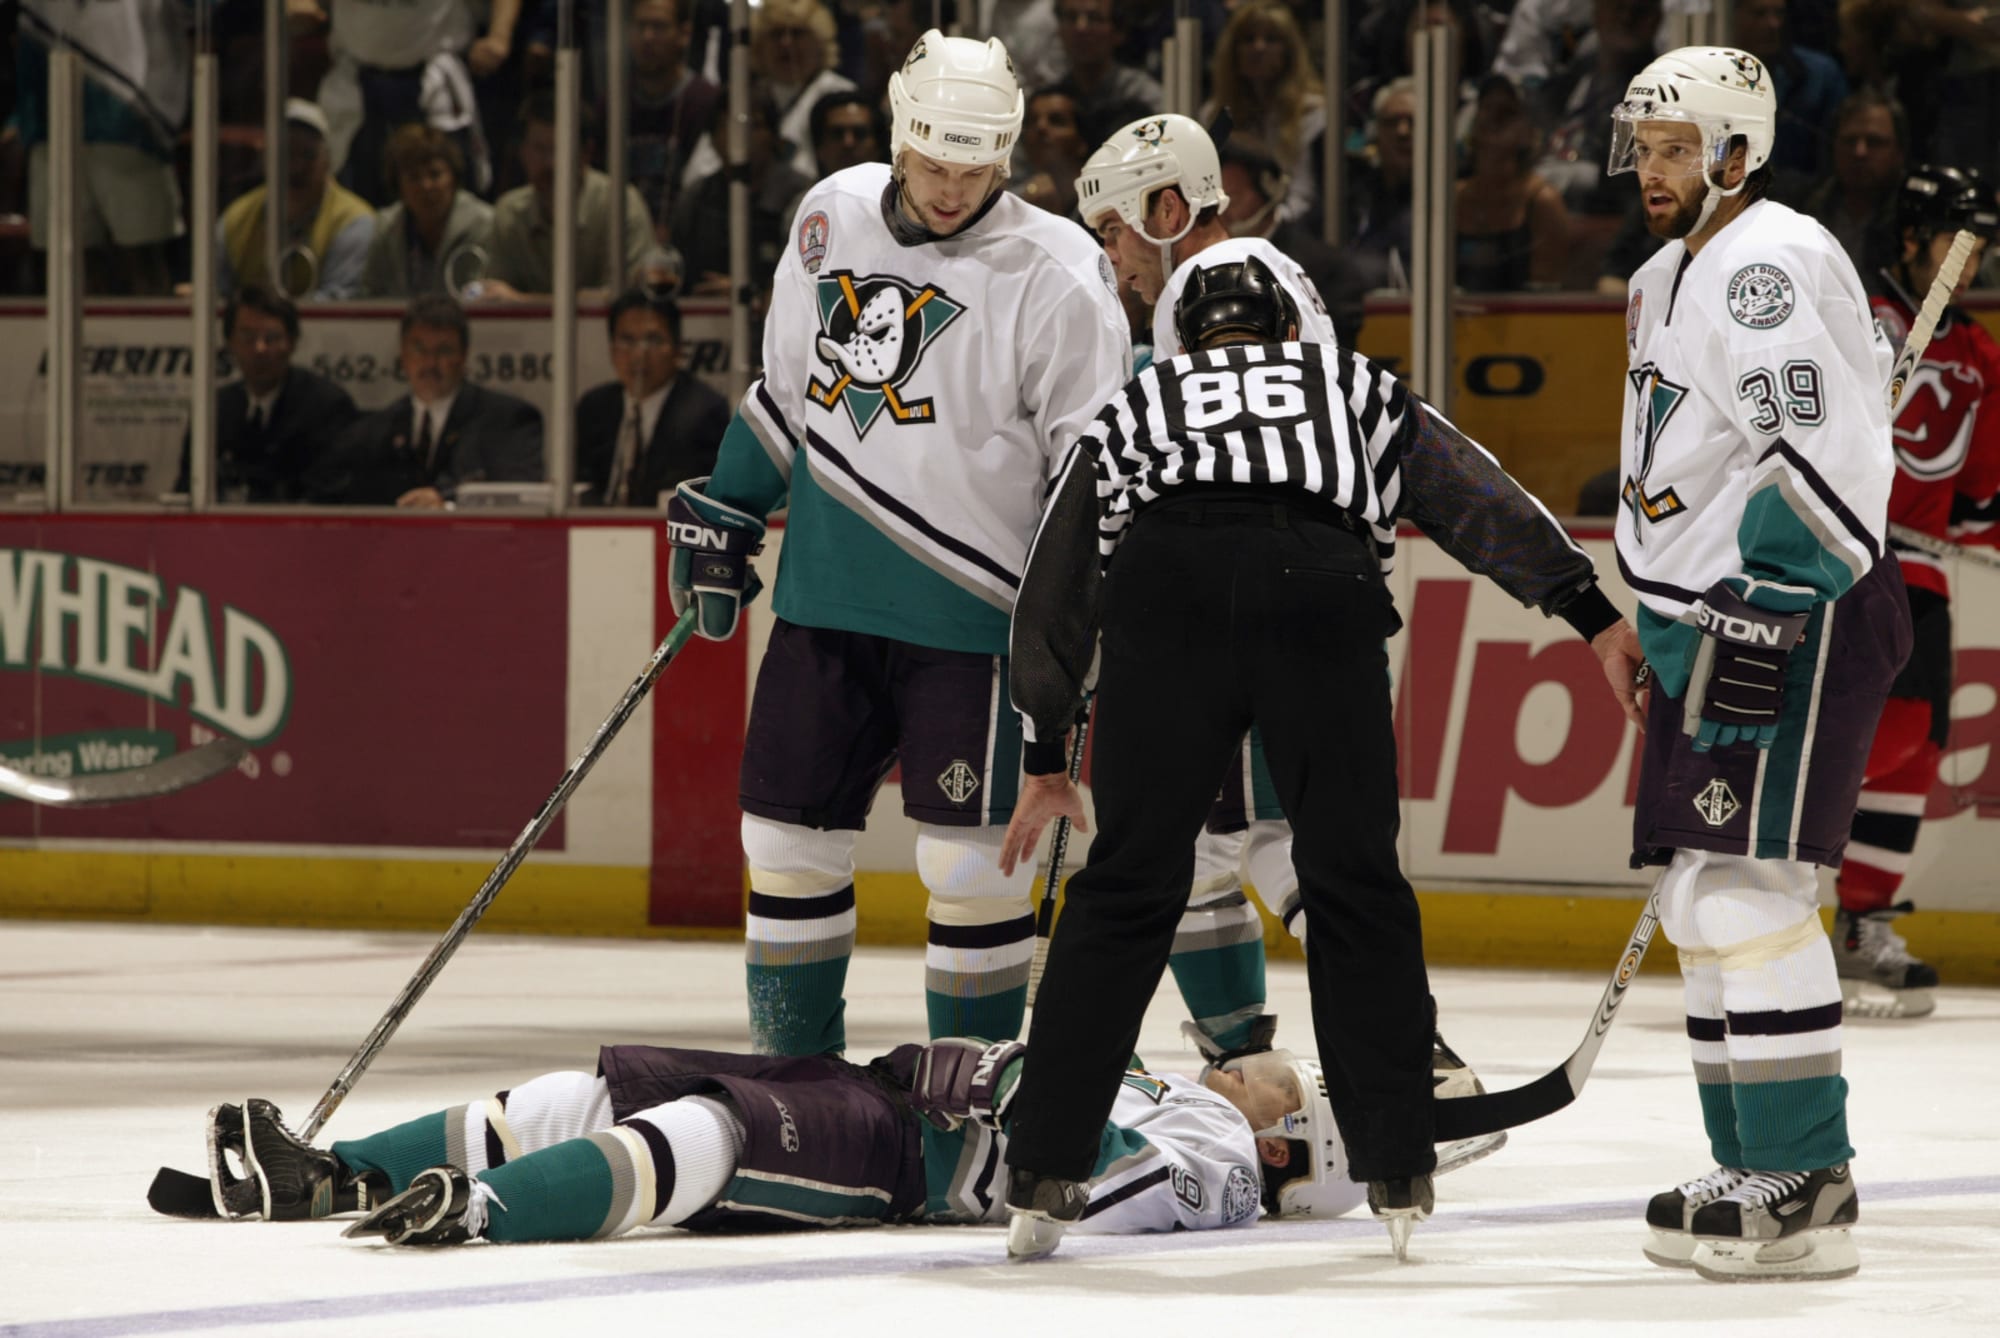 Off the Floor, On the Board! The 15th Anniversary of Paul Kariya's Mighty  Ducks Triumph - Page 5